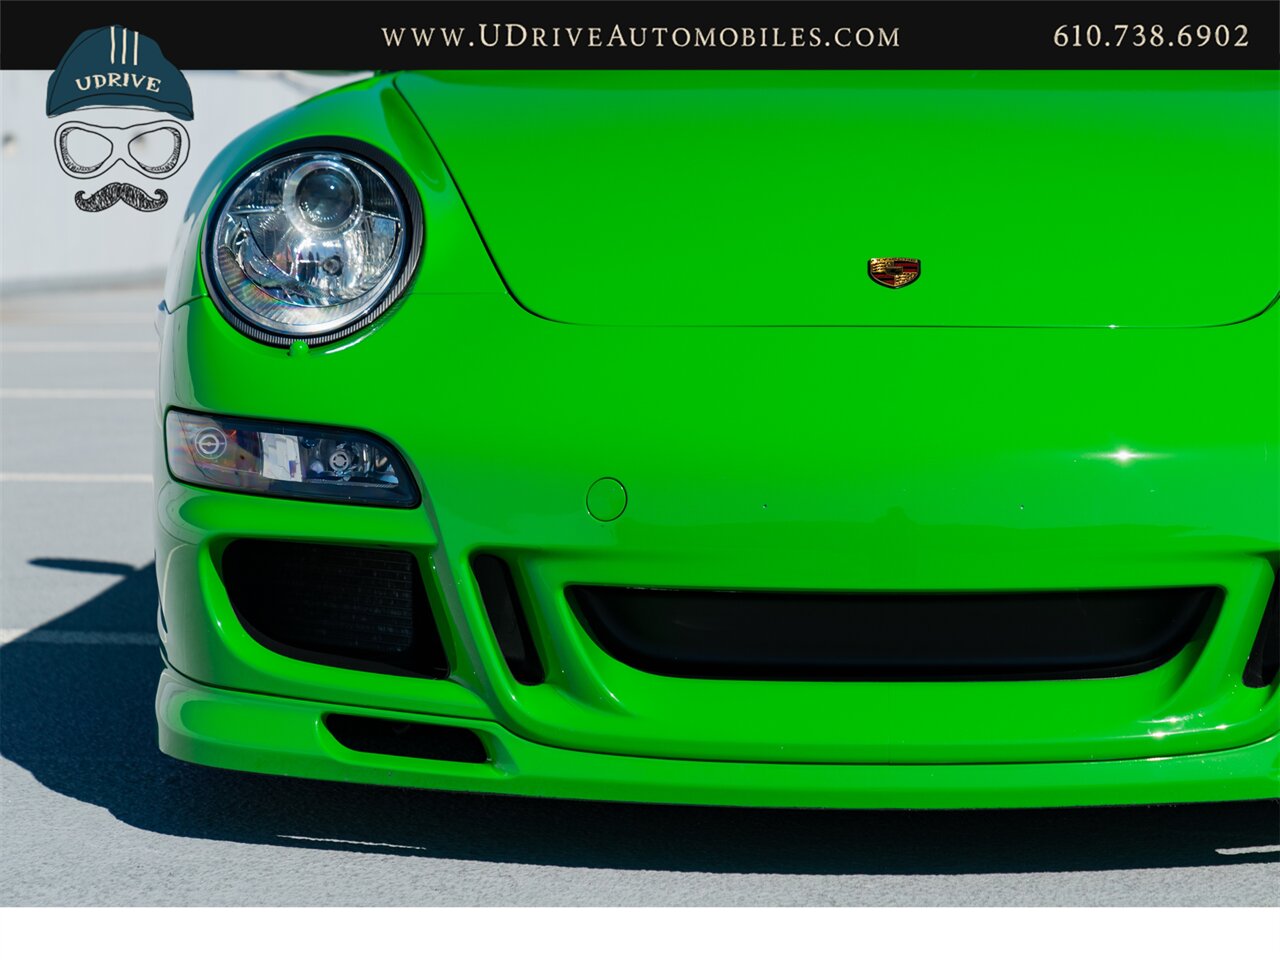 2006 Porsche 911 Carrera 4S  997 PTS Signal Green 6Sp Sport Sts Spt Chrono Spt Exhst - Photo 15 - West Chester, PA 19382